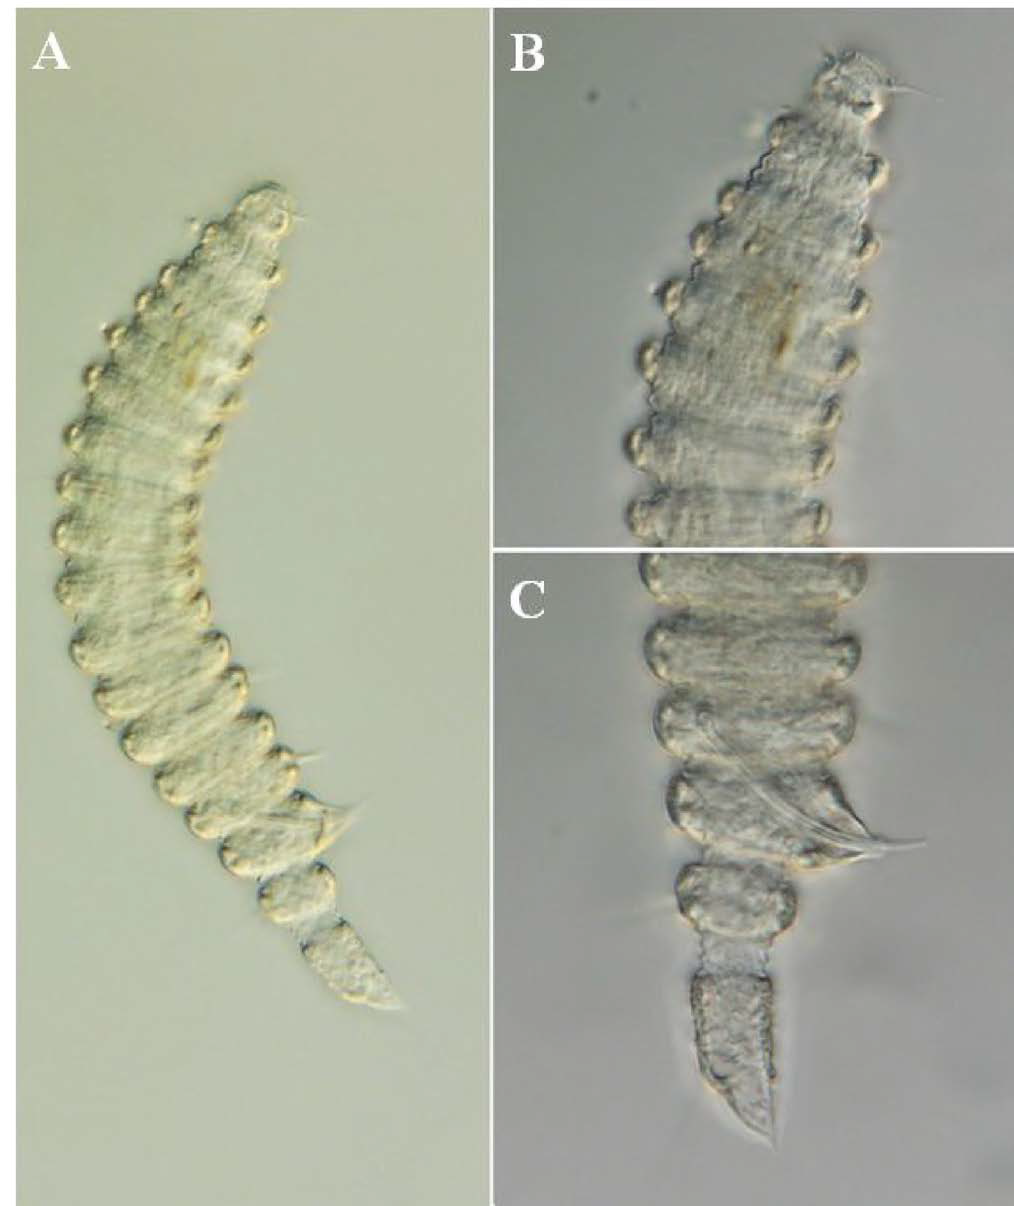 Desmoscolex n. sp. 12, DIC photomicrographs, male, lateral view